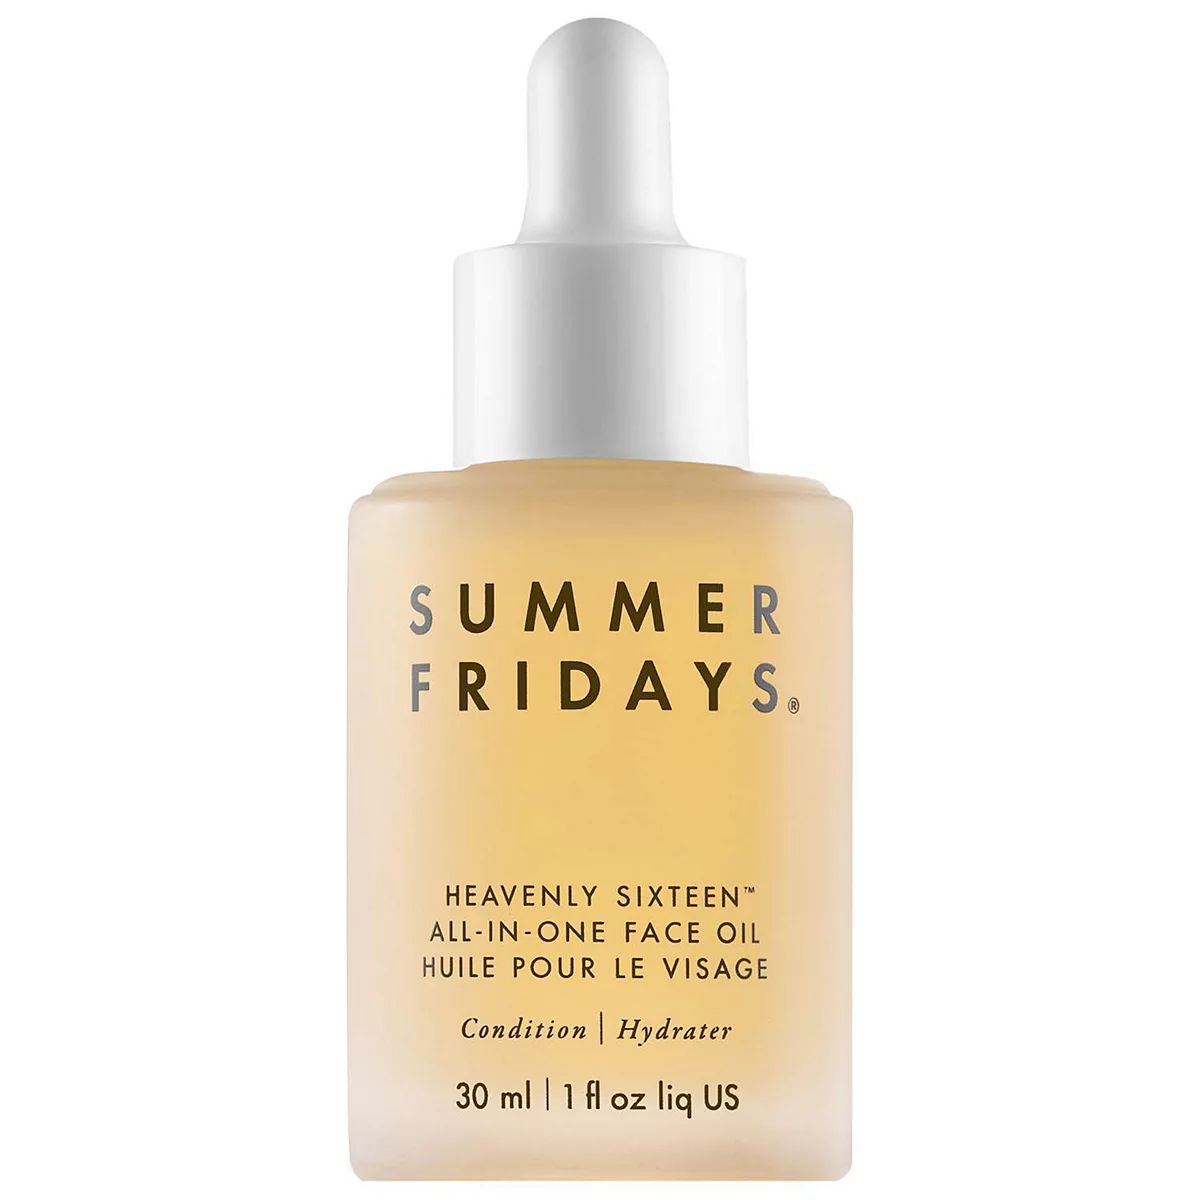 Summer Fridays Heavenly Sixteen All-In-One Face Oil | Kohl's